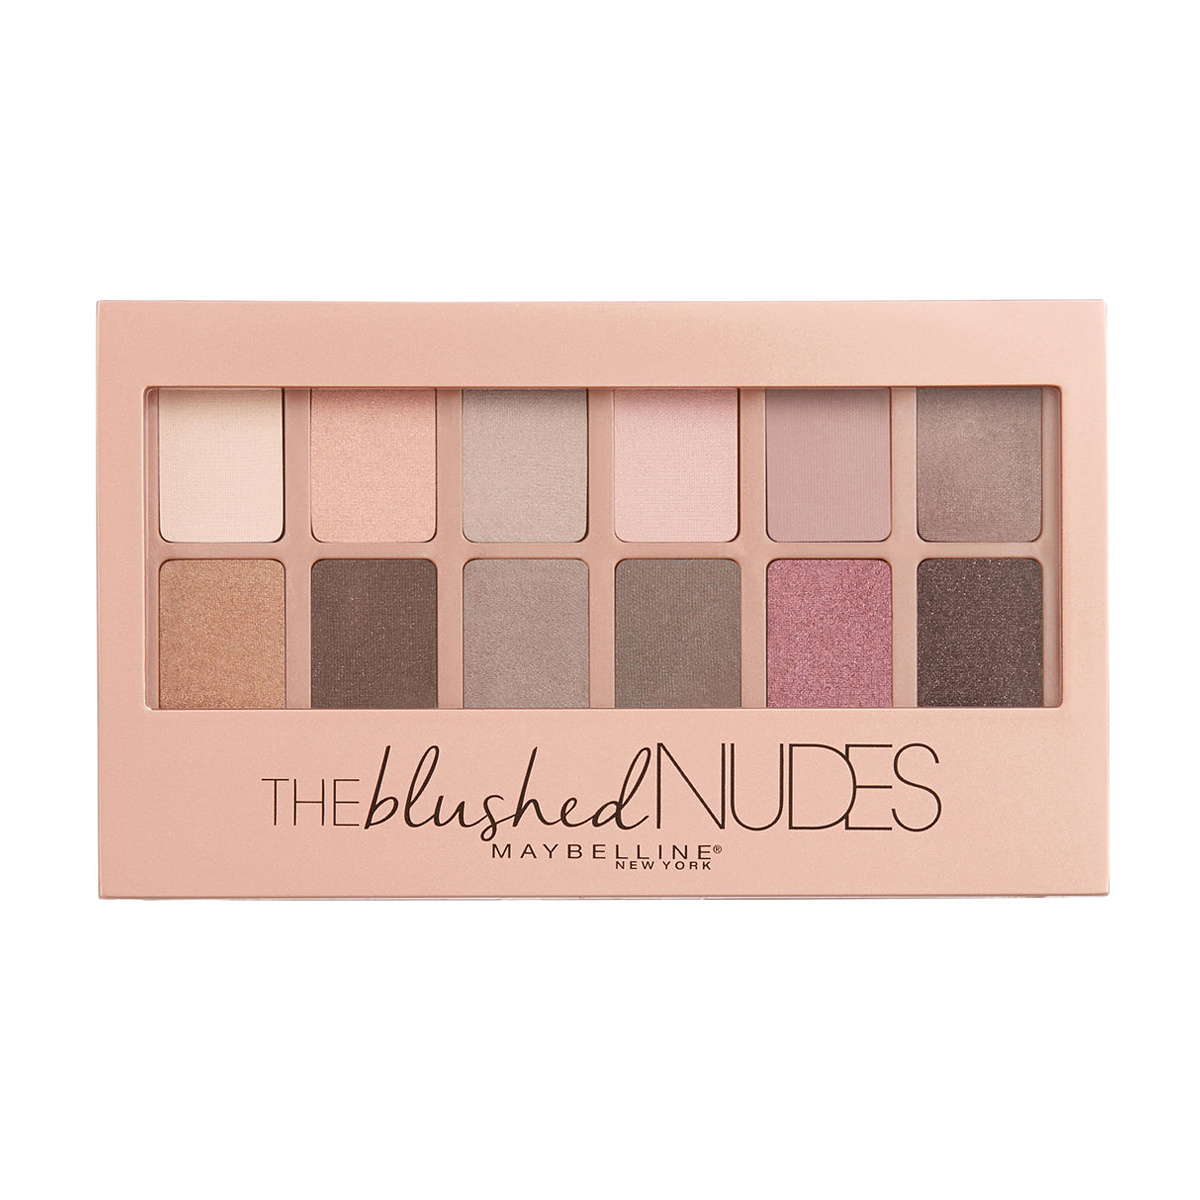 Maybelline New York Blushed Nudes Shadow Palette